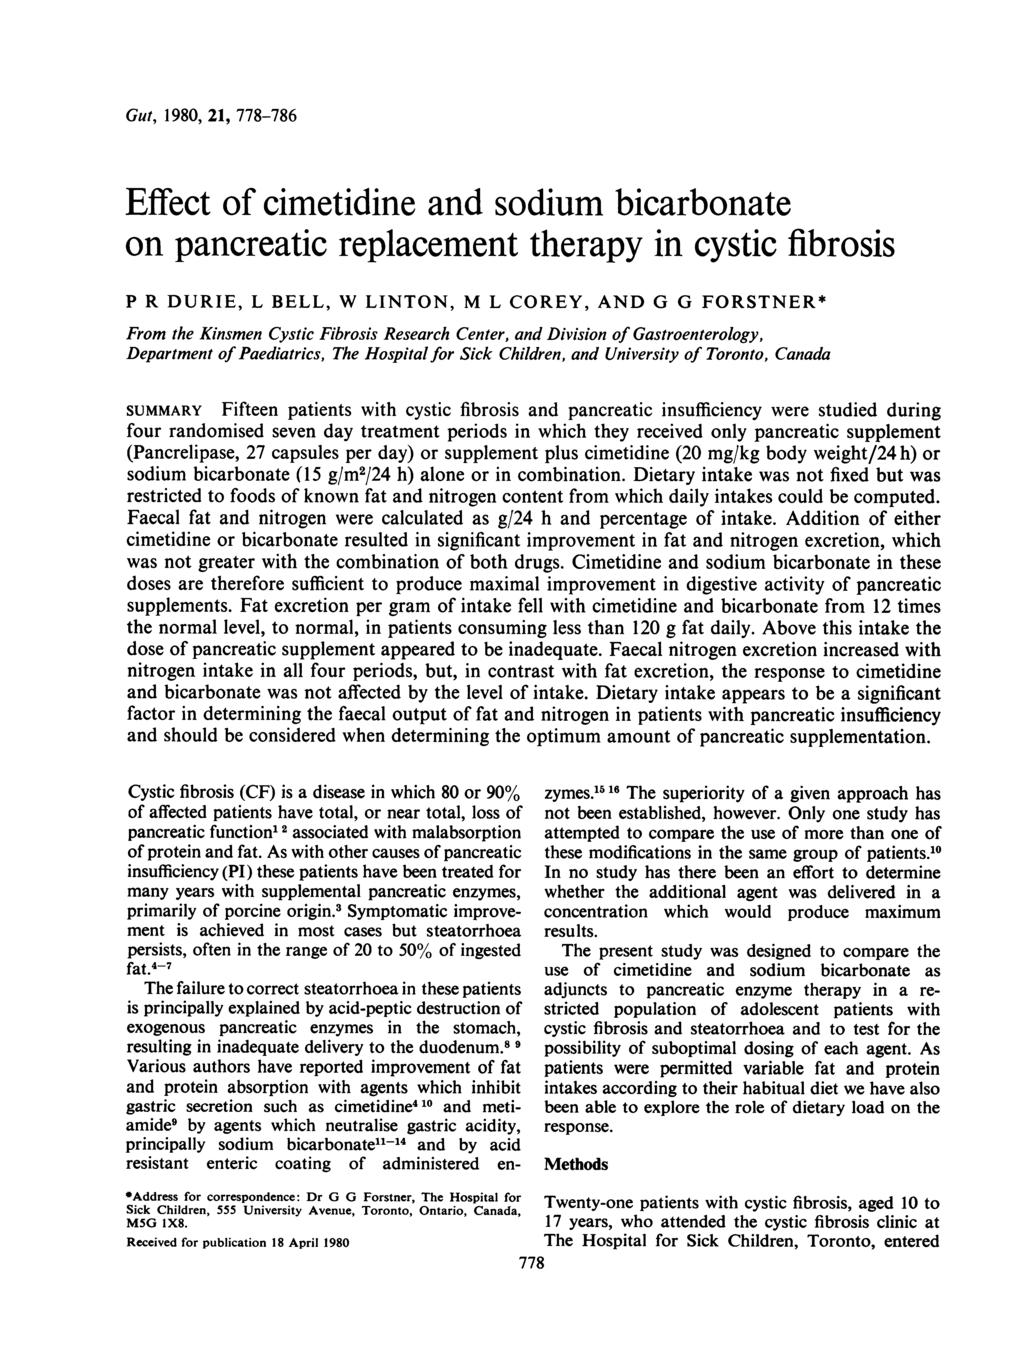 Gut, 198, 21, 778-786 Effect of cimetidine and sodium bicarbonate on pancreatic replacement therapy in cystic fibrosis P R DURIE, L BELL, W LINTON, M L COREY, AND G G FORSTNER* From the Kinsmen